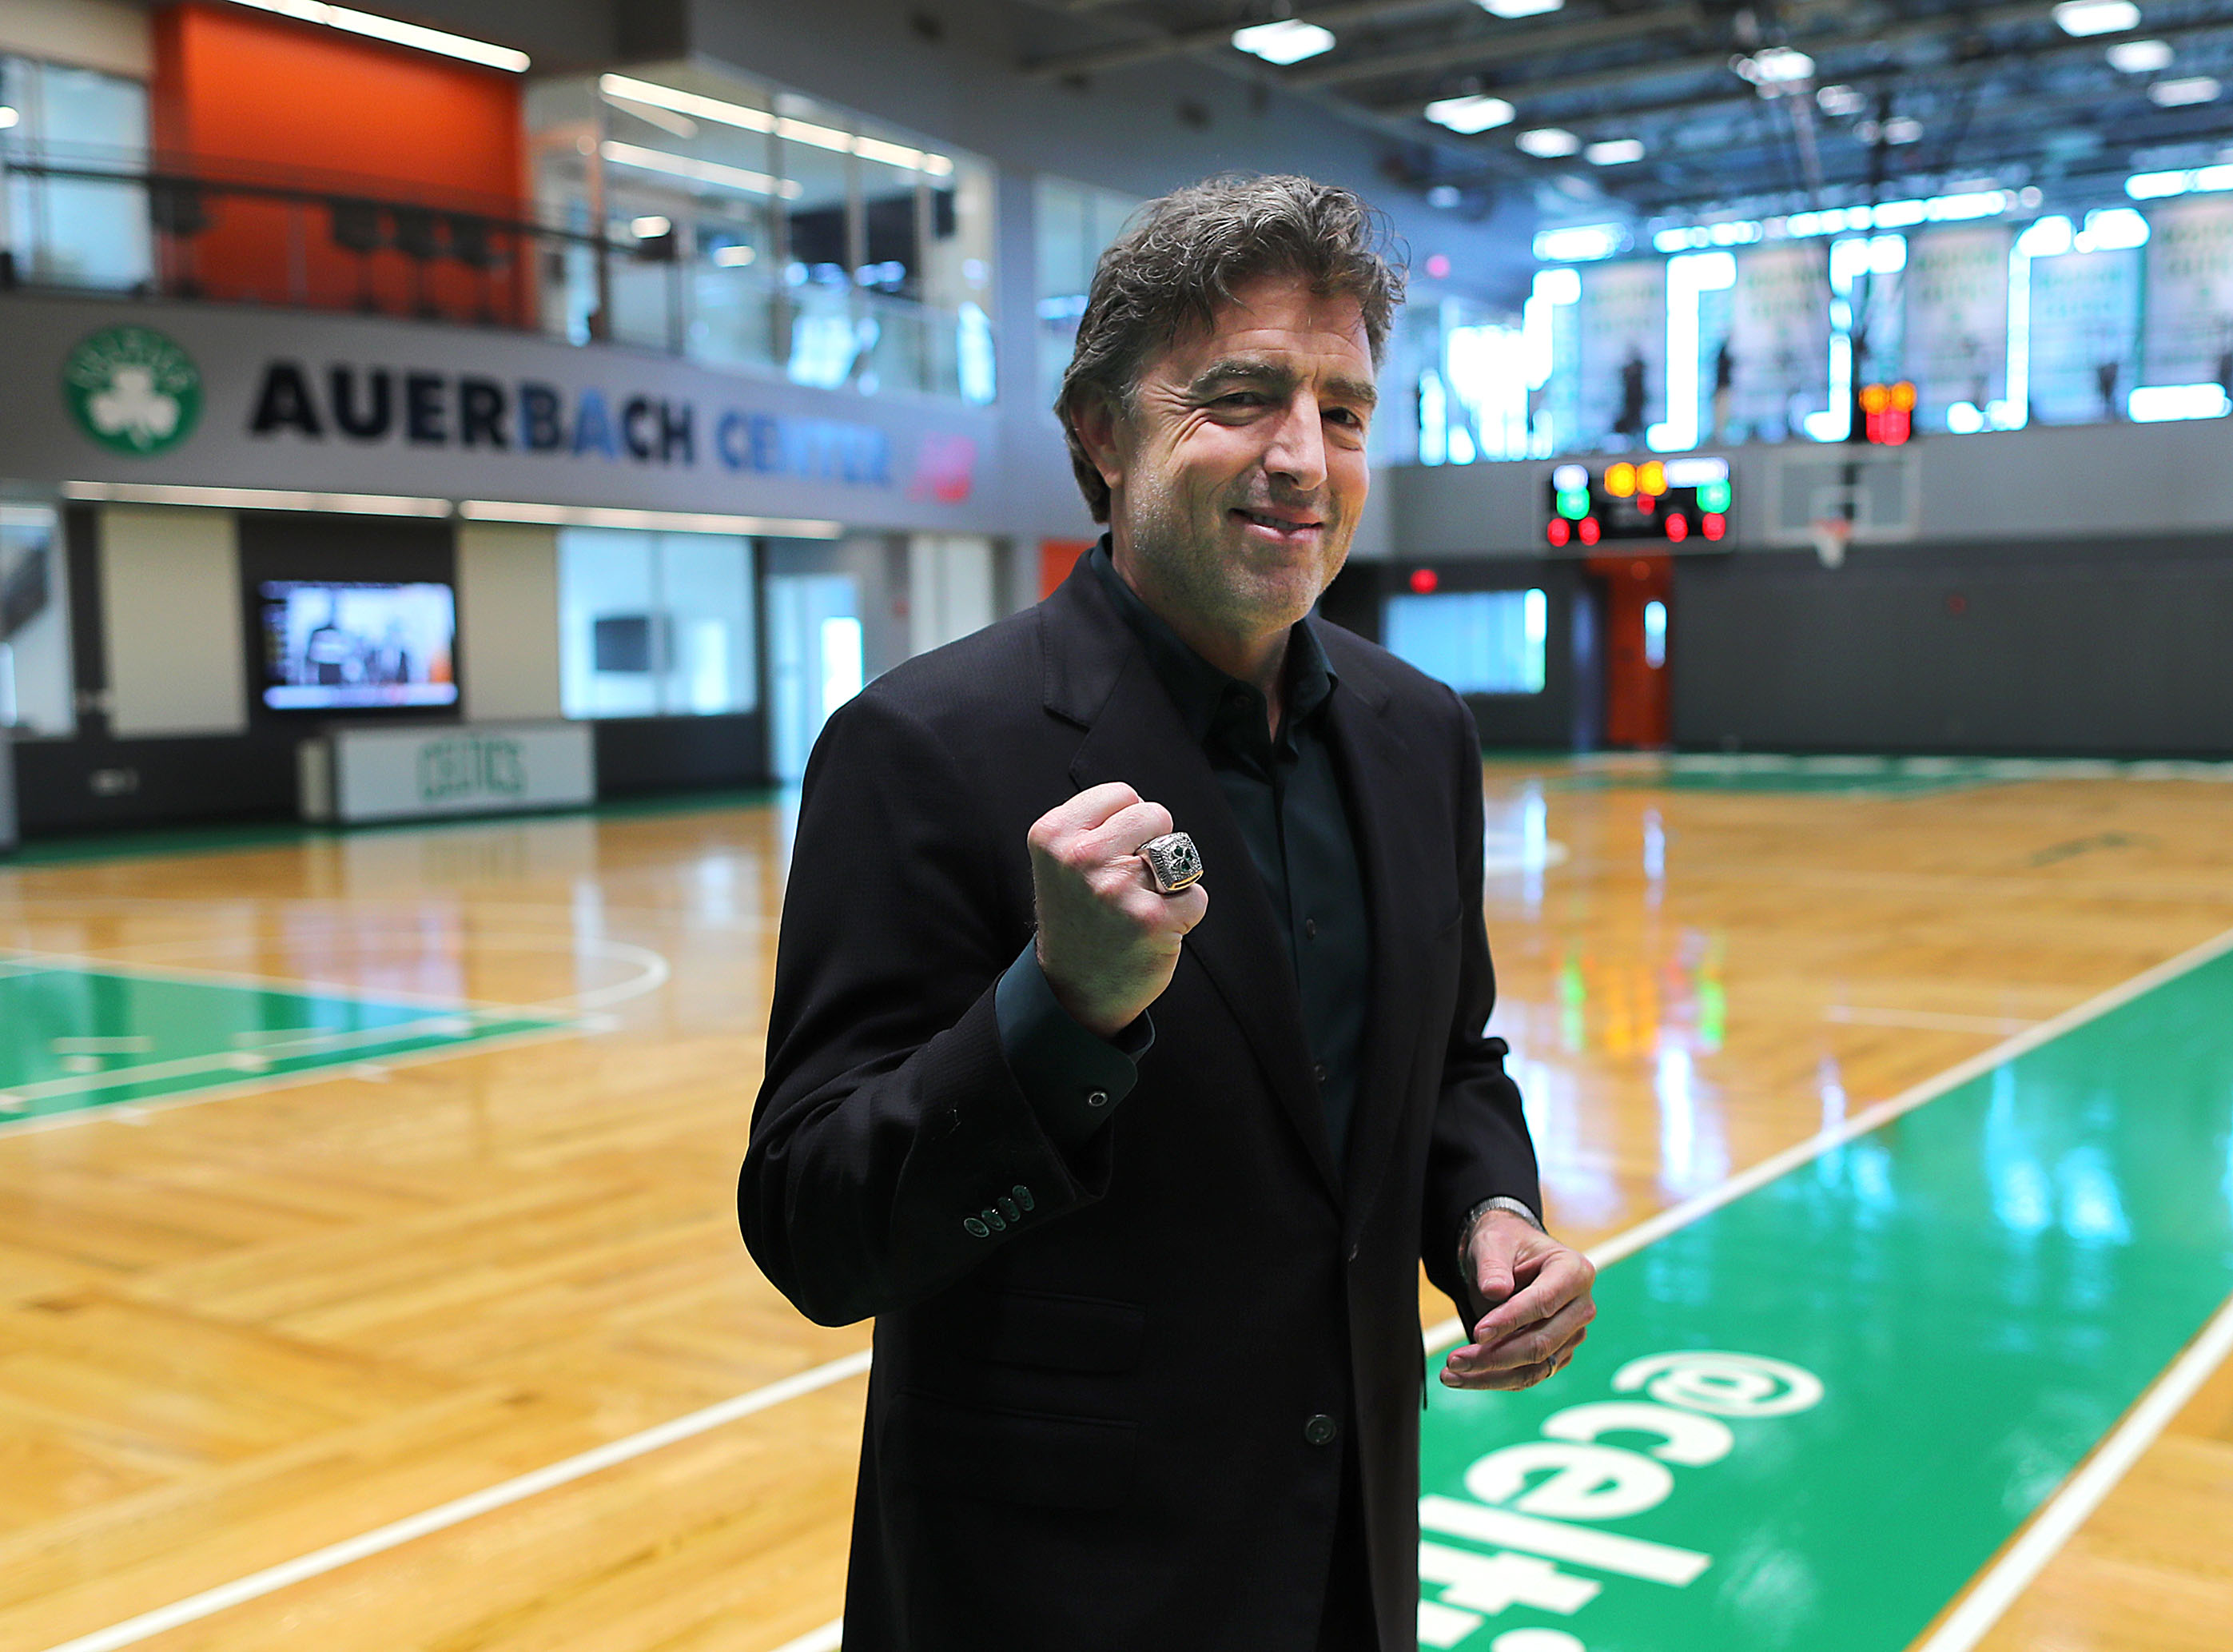 Boston Celtics CEO Wyc Grousbeck pumps his fist with a Celtics championship ring on his finger.